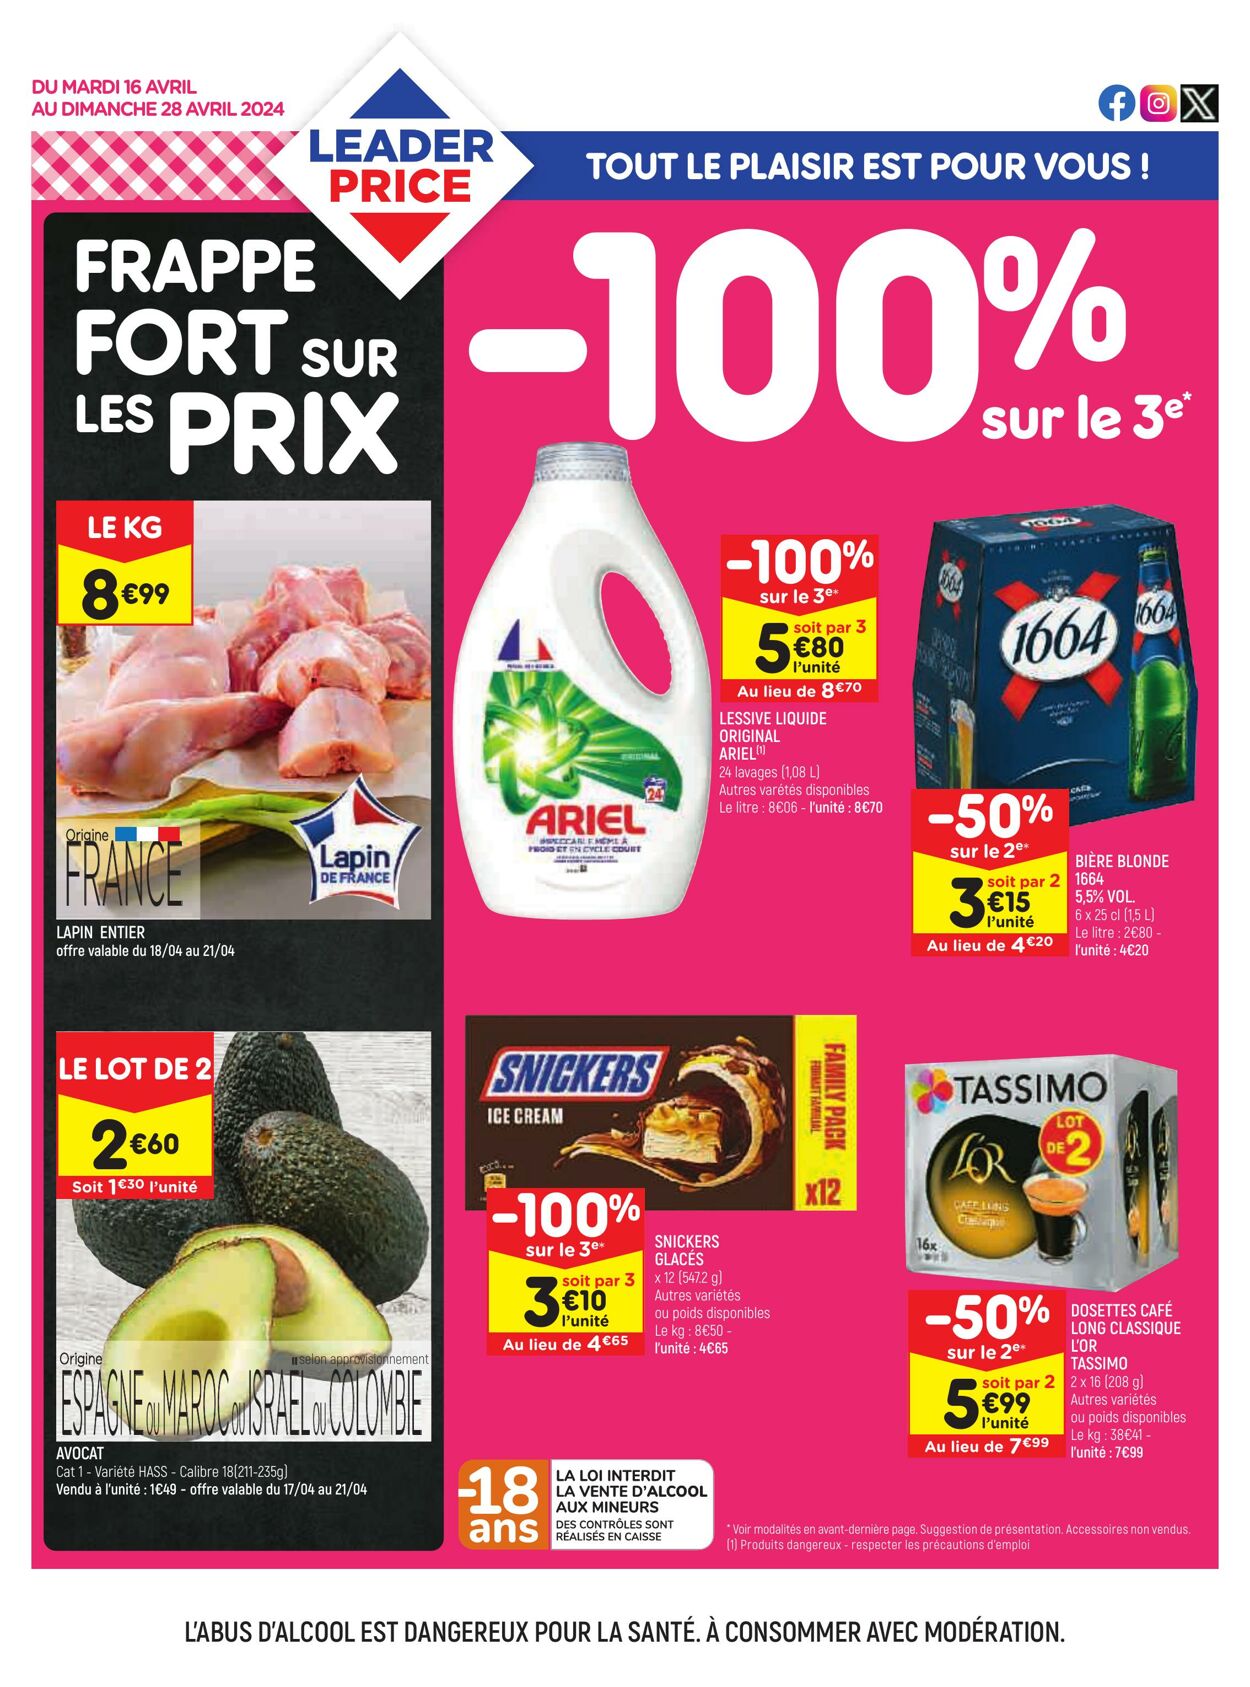 Leader Price Catalogues promotionnels